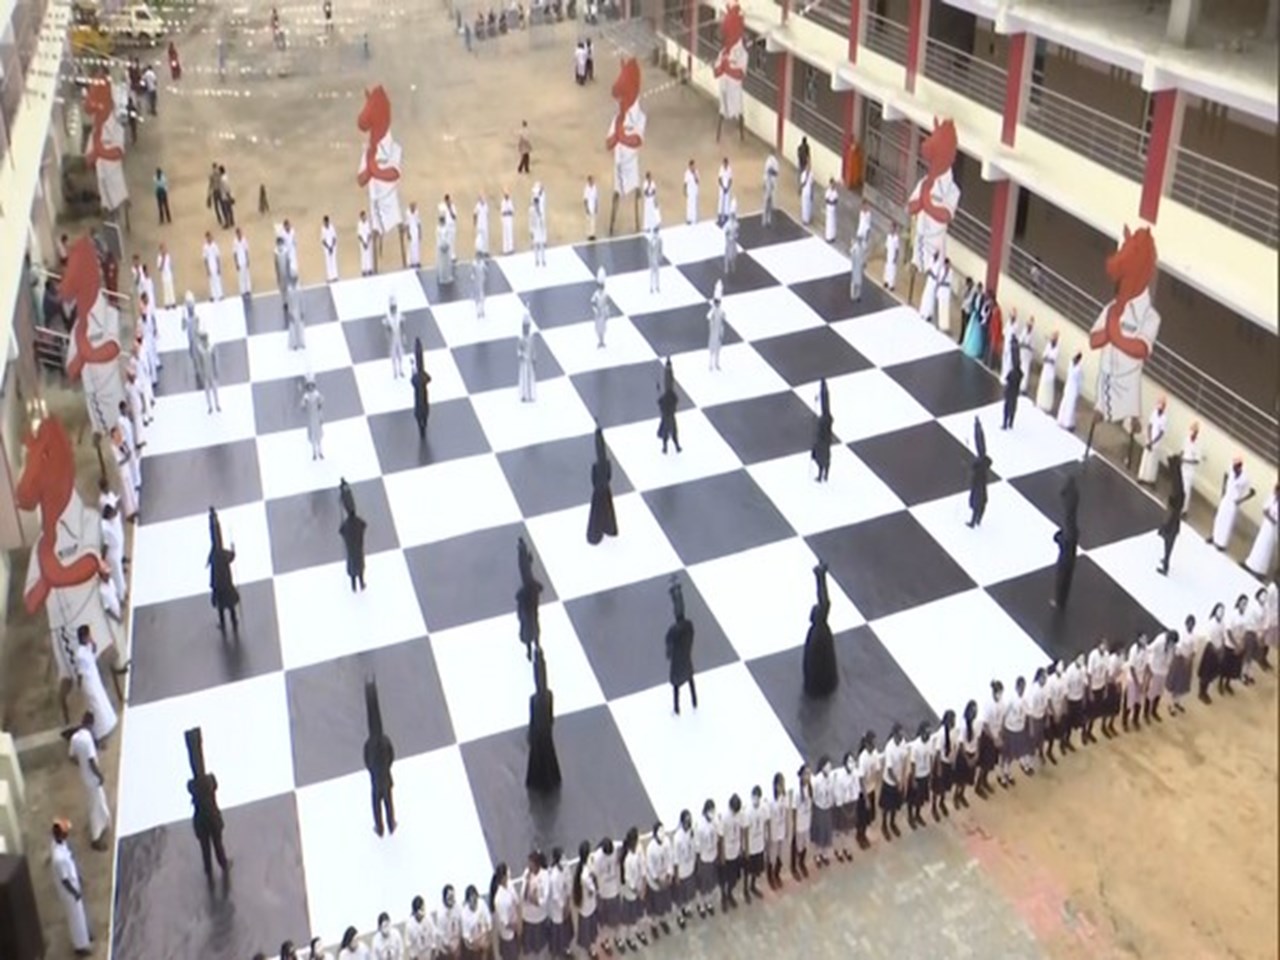 Chennai Chess Olympiad updates  Declaring open the 44th Chess